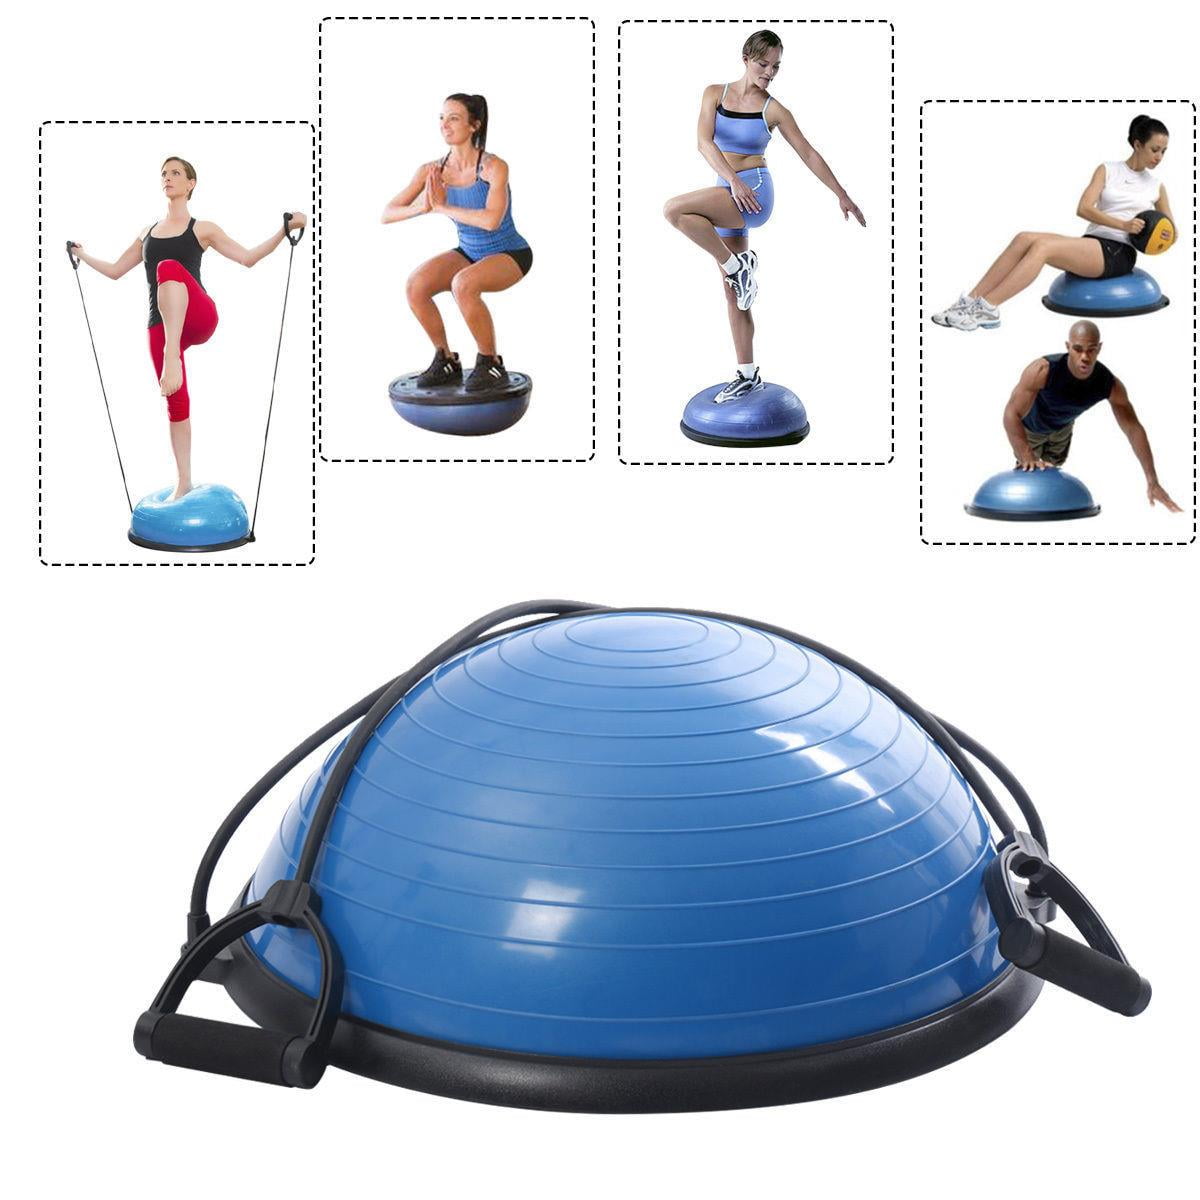 Zimtown Ktaxon Fitness Blue Yoga Stability Balance Trainer Ball with Resistance Bands and Pump Exercise Workout Kit